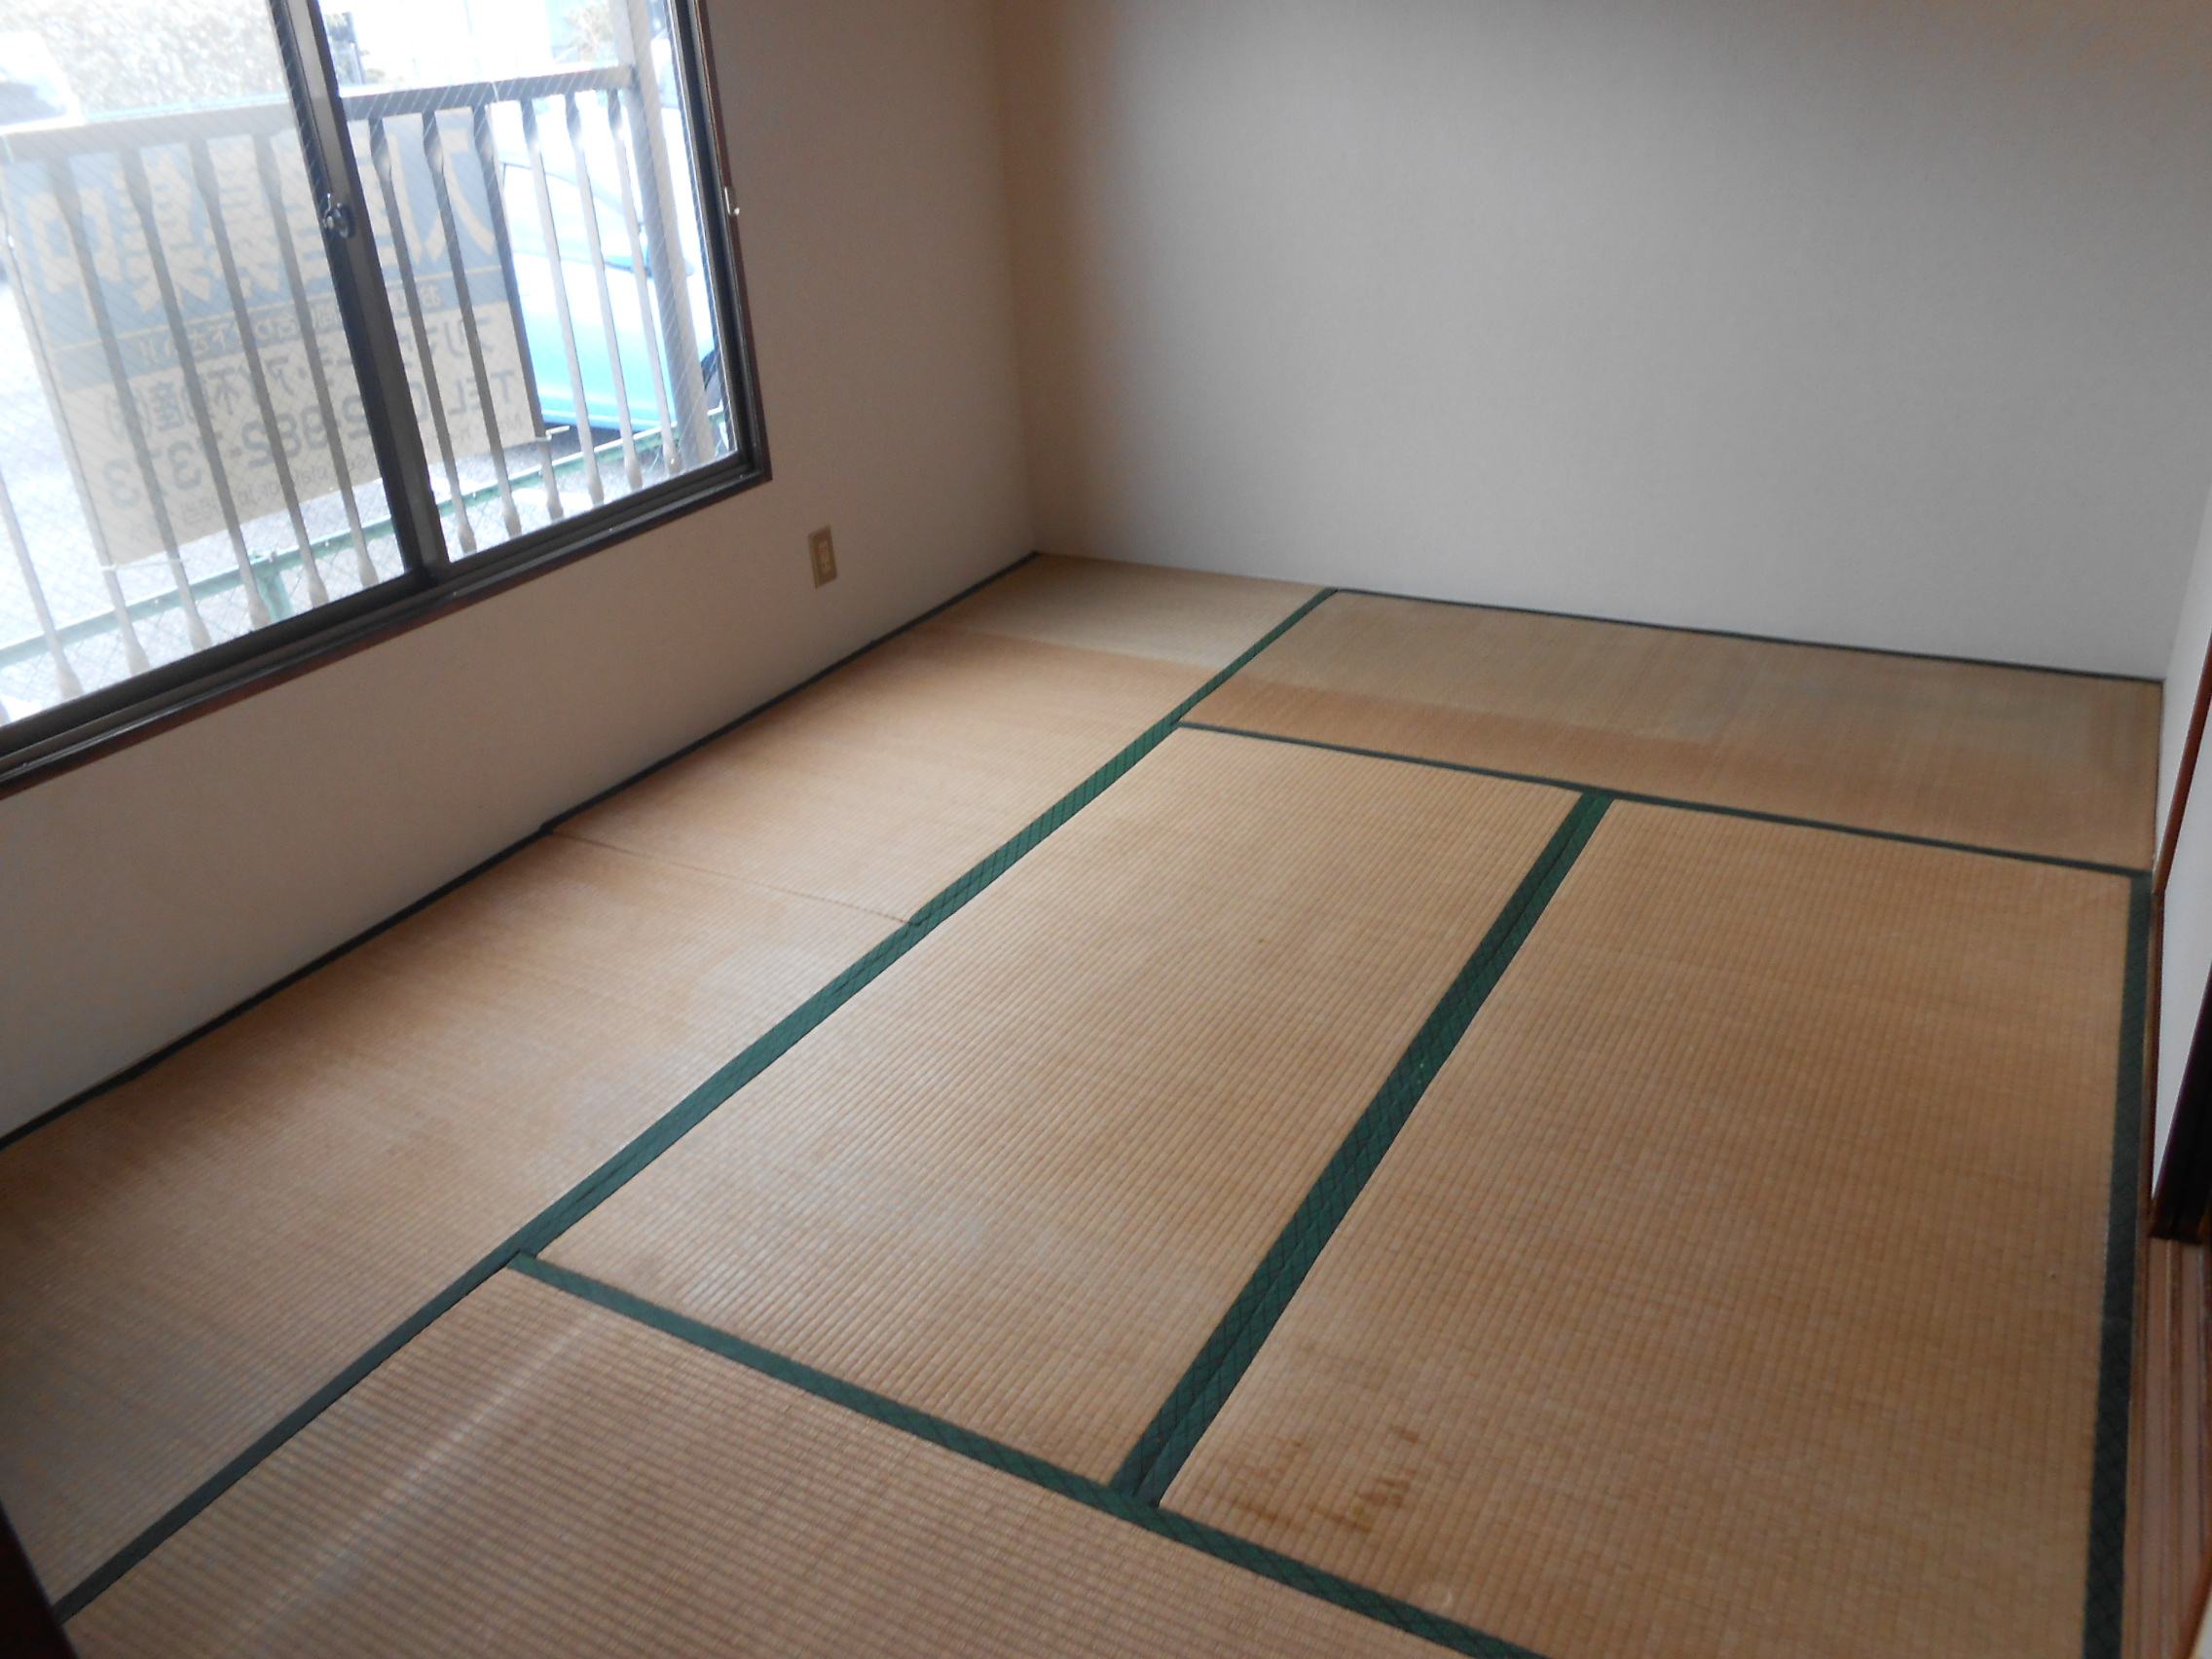 Other room space. Other Japanese-style room 6 quires